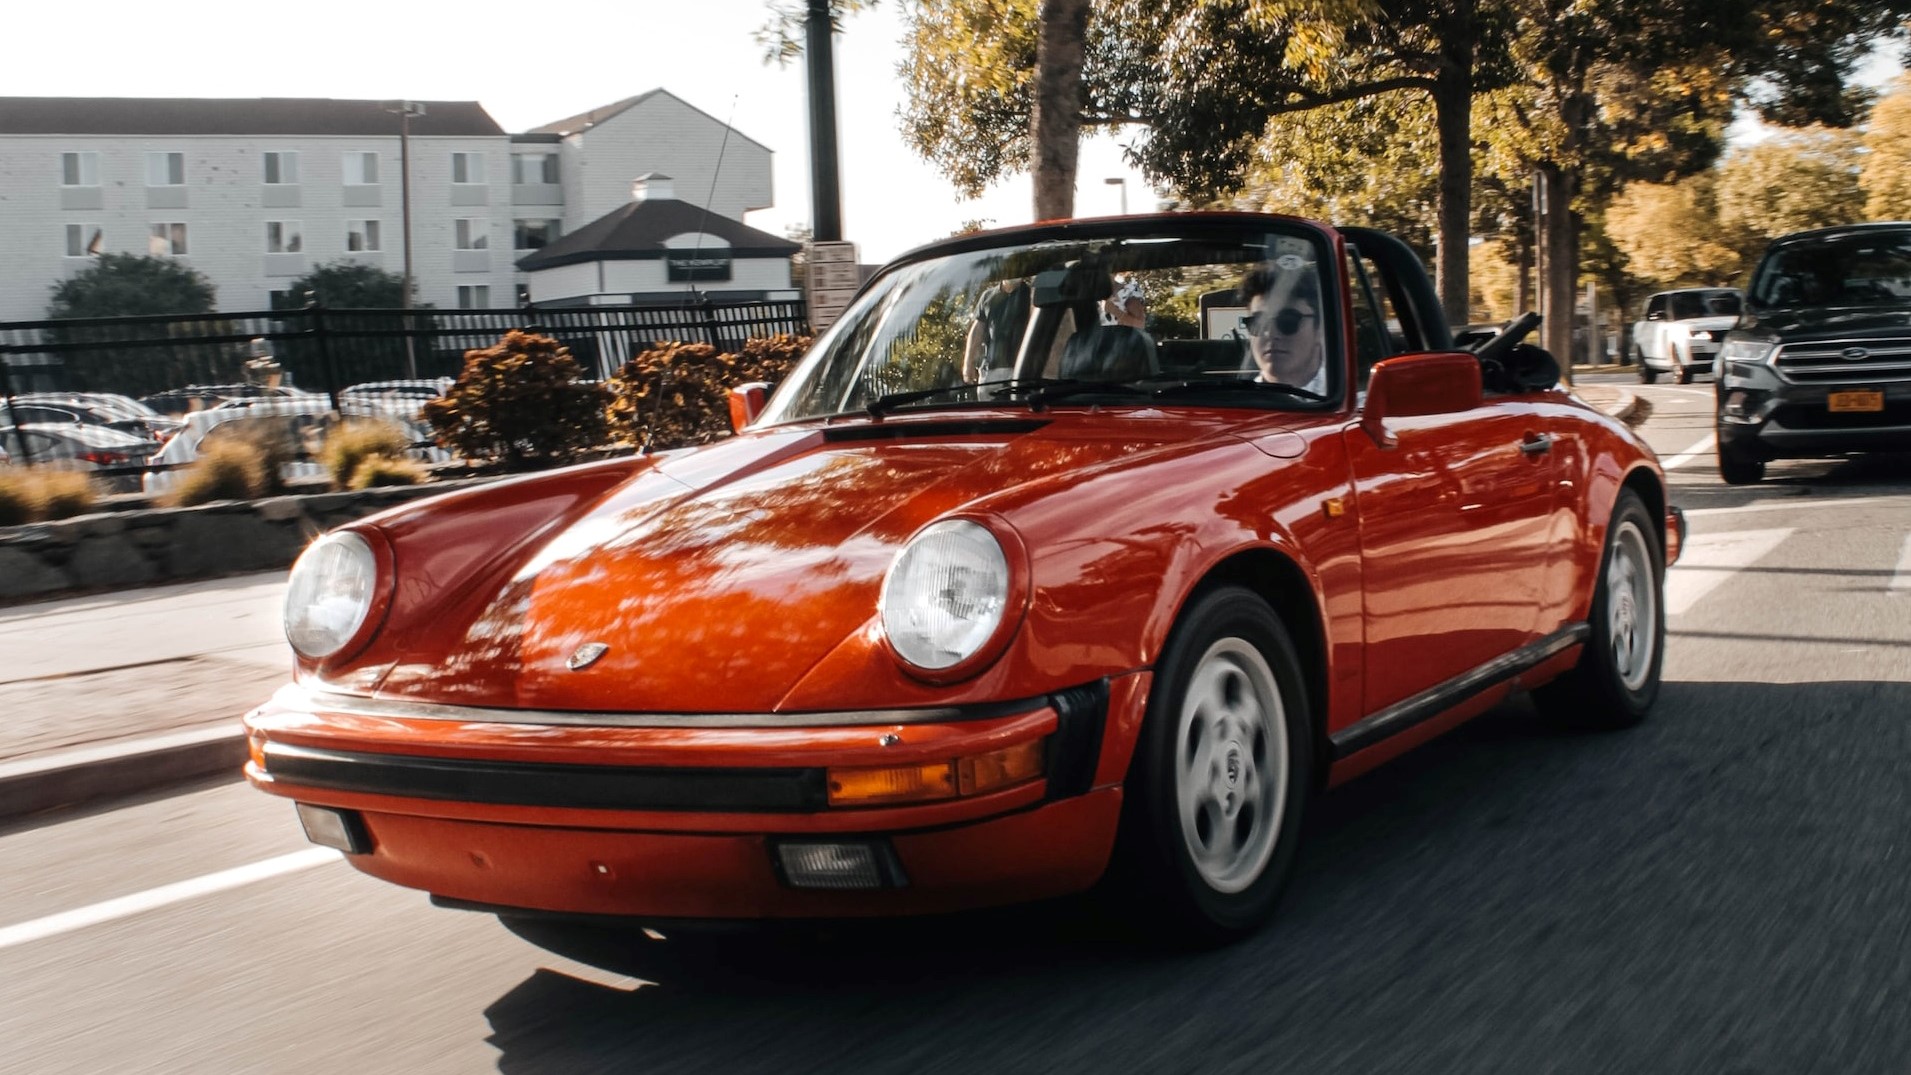 Red porsche on road | Goodwill Car Donations